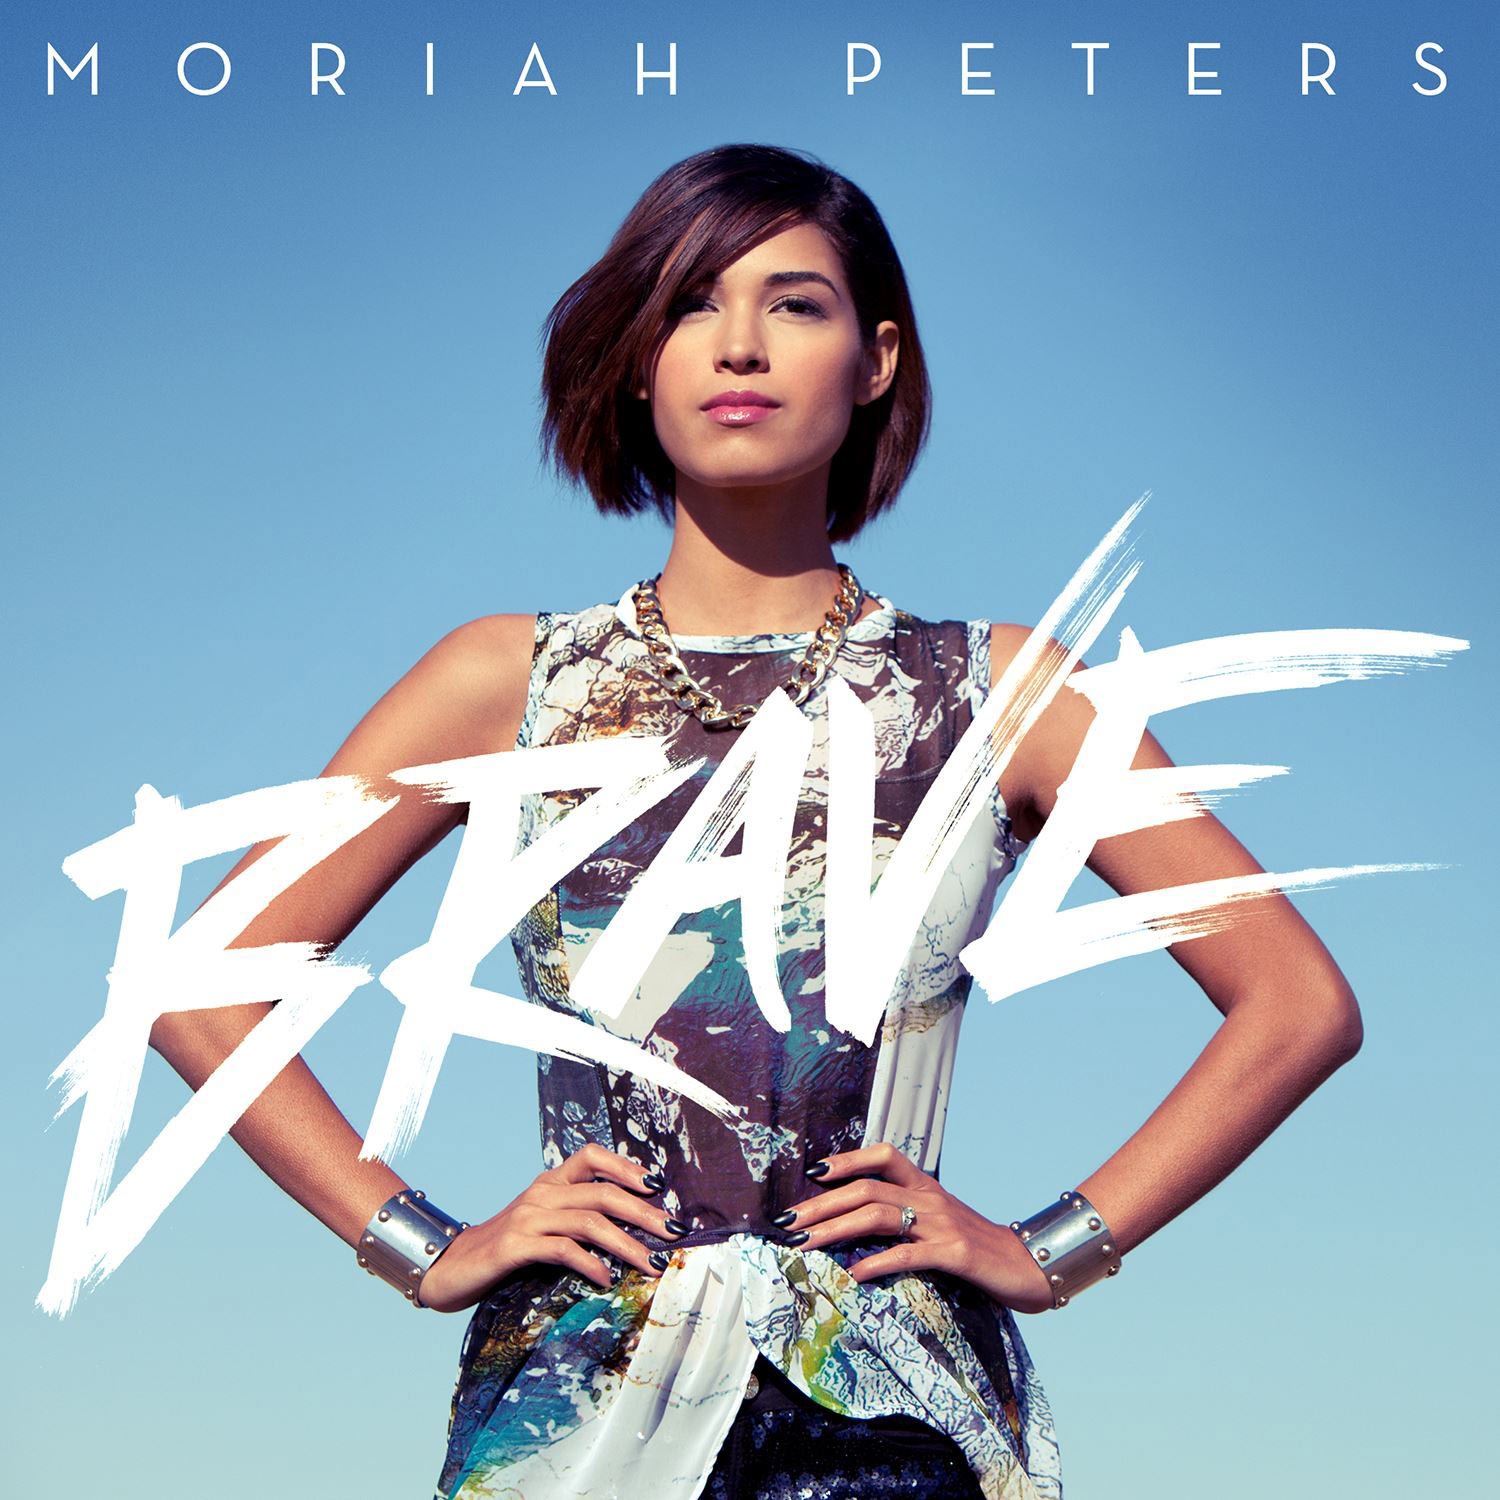 Moriah peters i ll wait for you